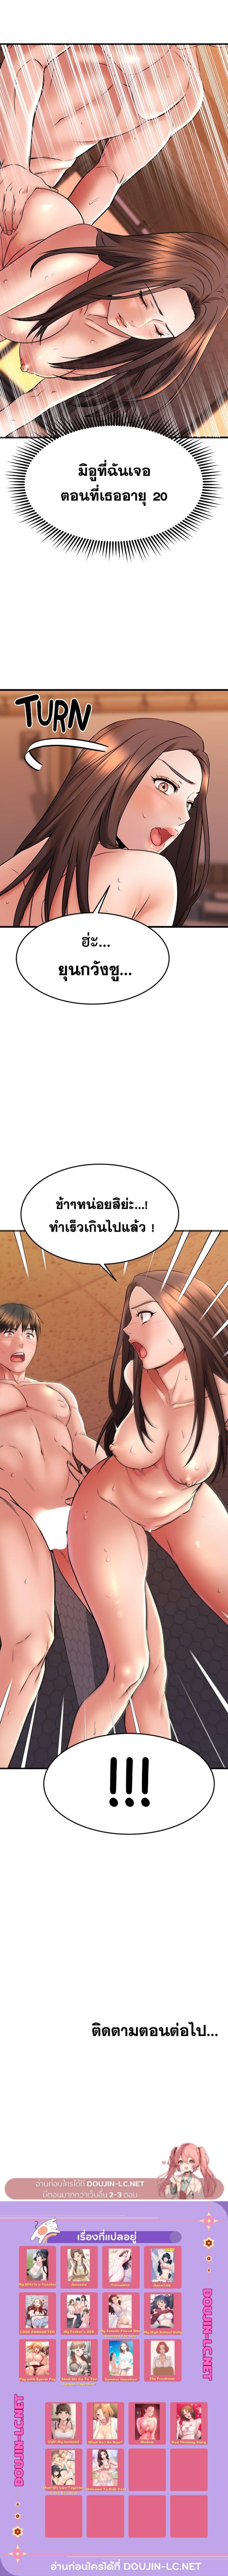 My Female Friend Who Crossed The Line 41 ภาพที่ 23